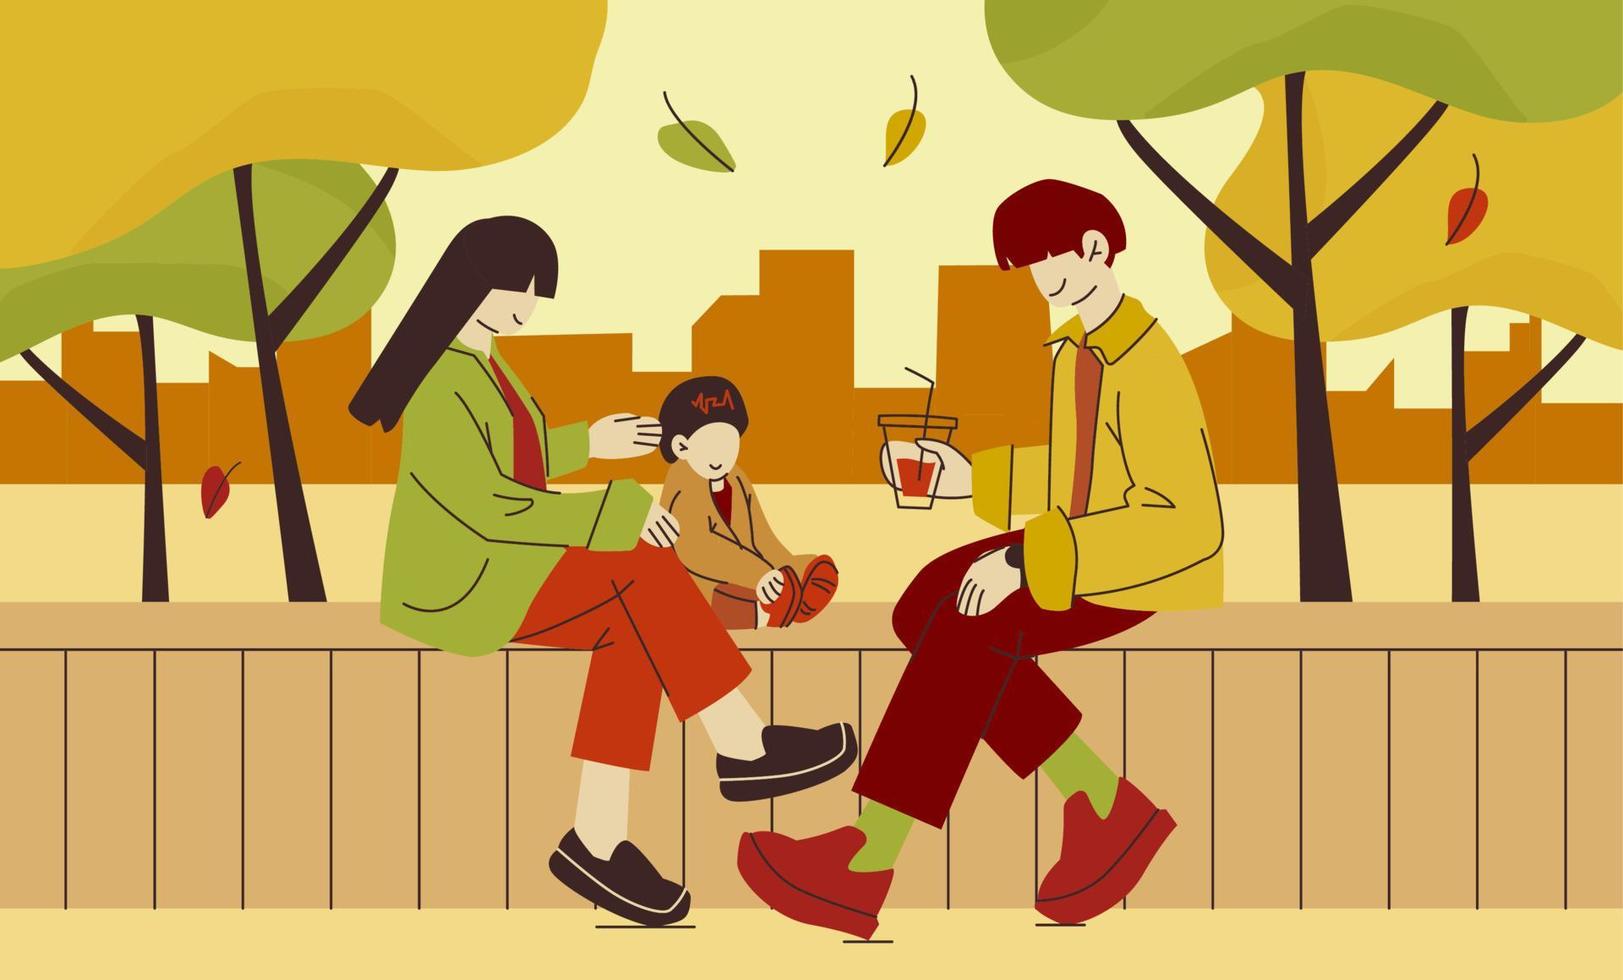 Family sits on a bench under the trees in the fall. Man, woman and child outside spending time together. Flat modern vector colorful illustration.